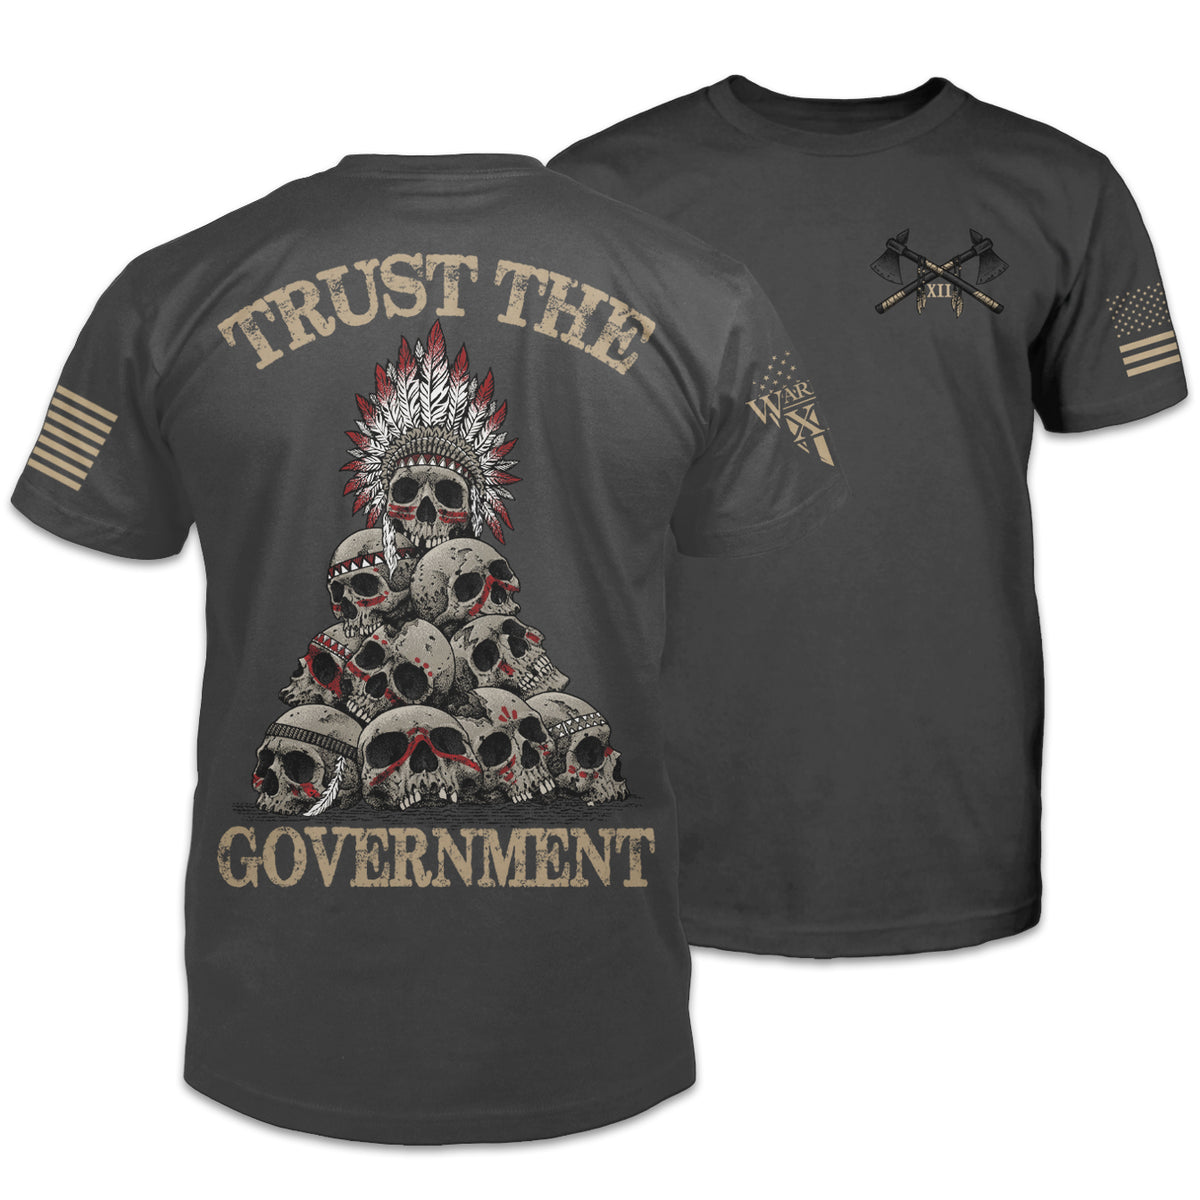 Front and back dark grey t-shirt with the words "Trust the government" printed on the shirt.